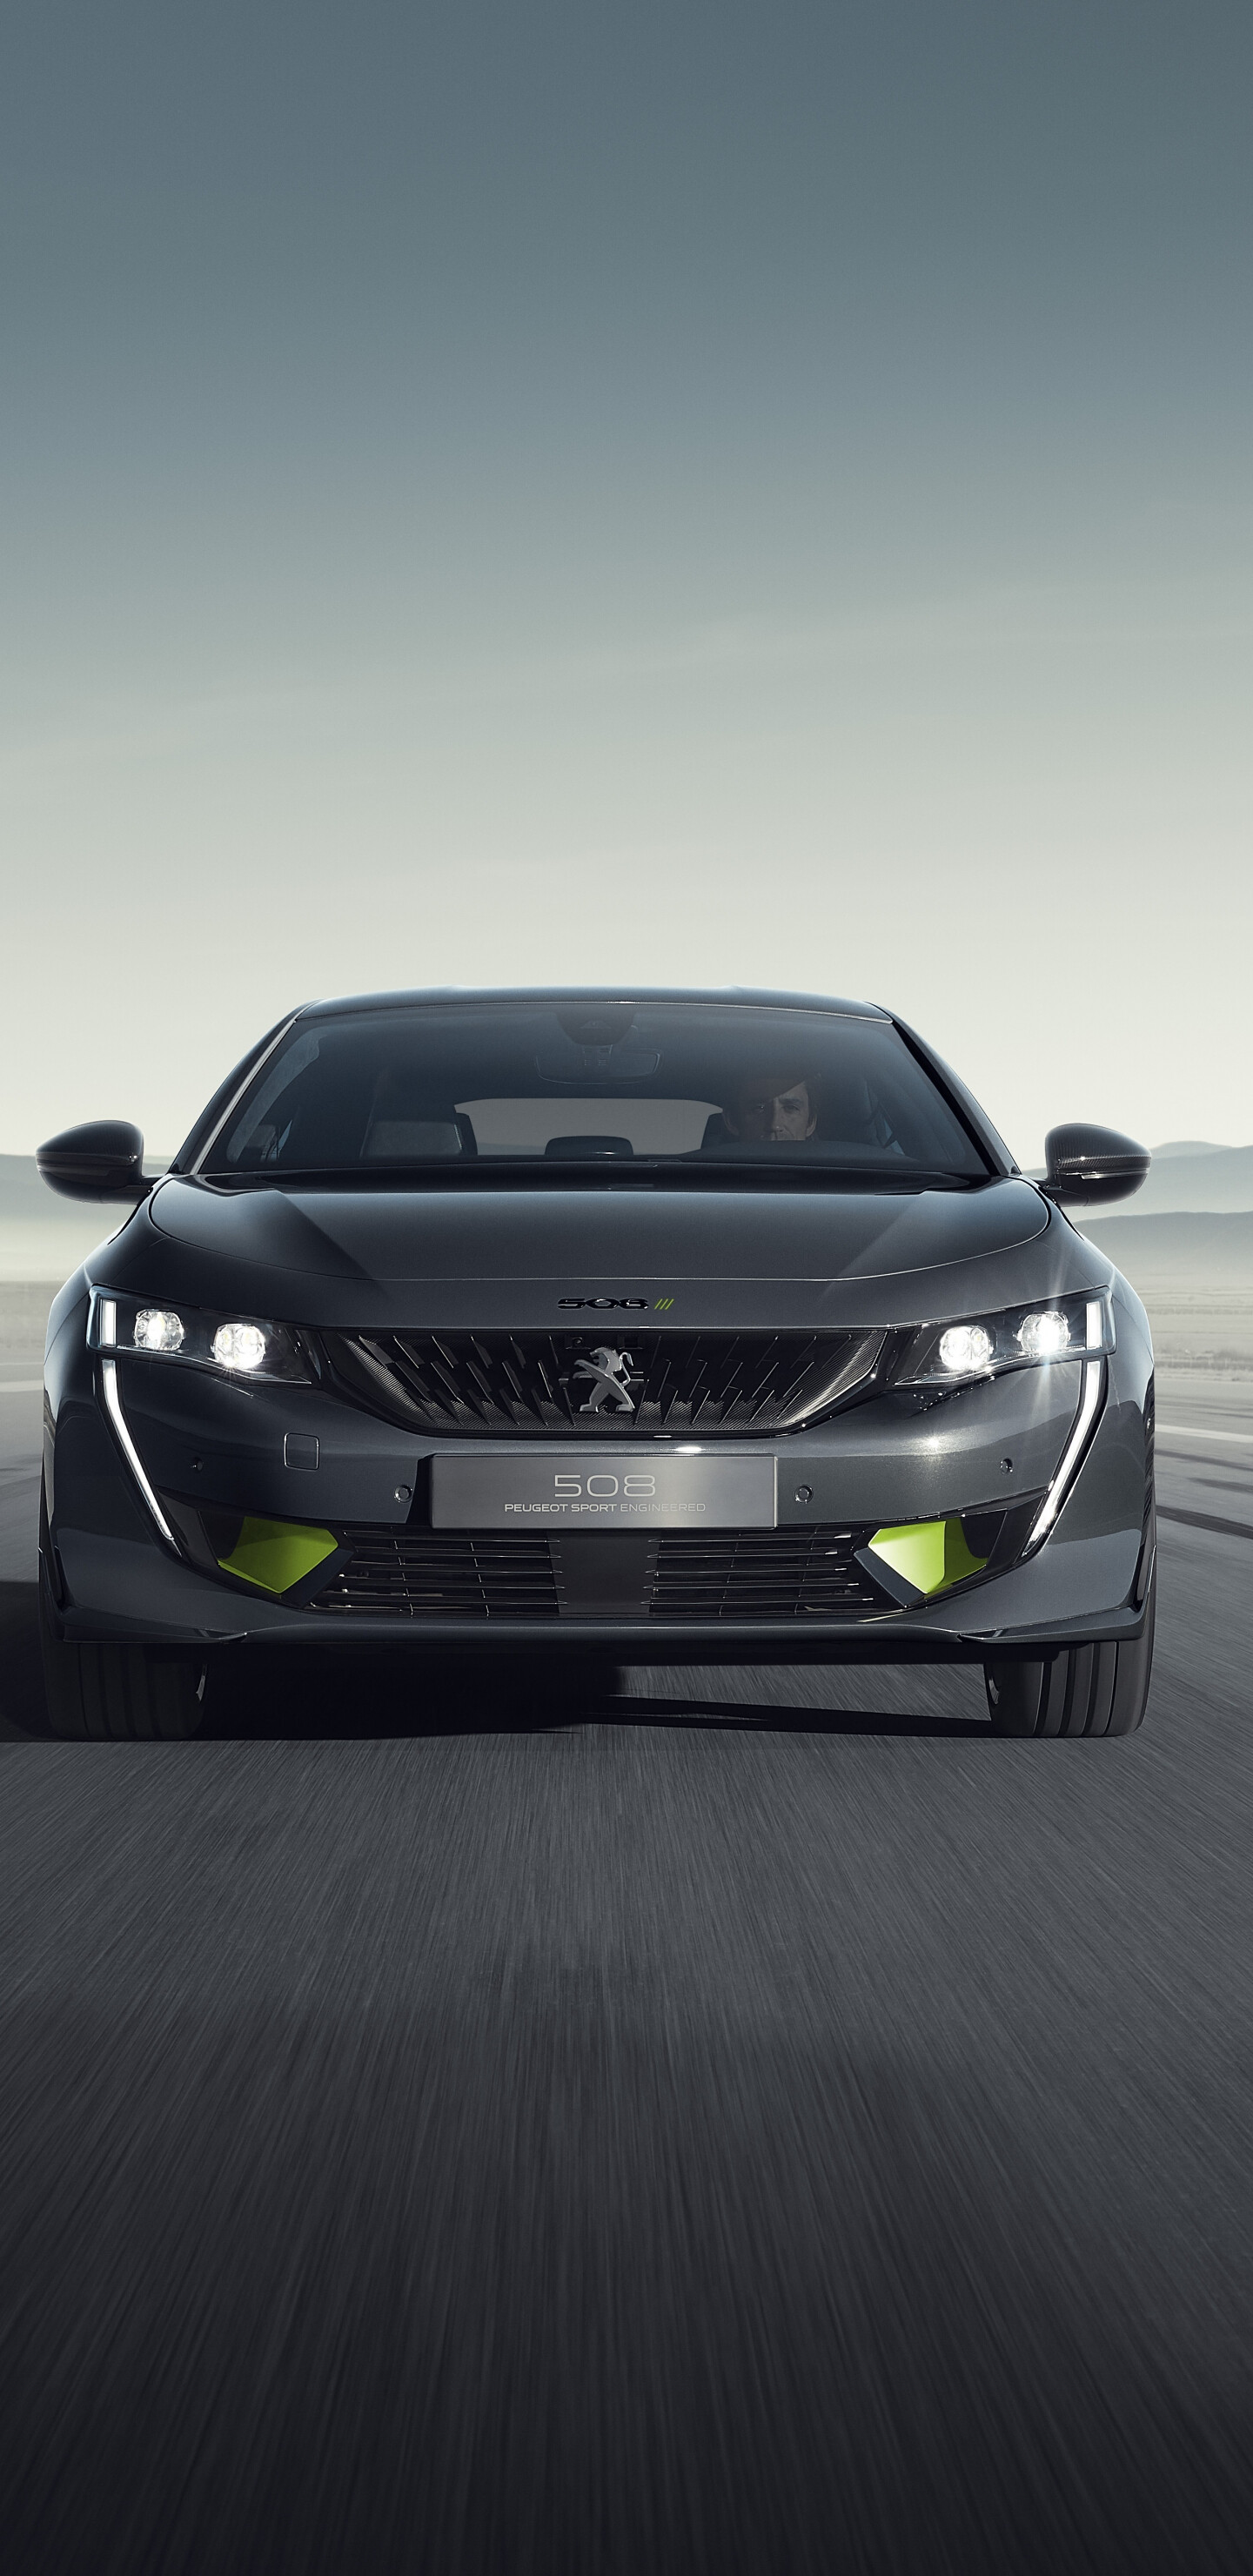 Peugeot: Model 508, The company has produced six winners of the European Car of the Year. 1440x2960 HD Wallpaper.